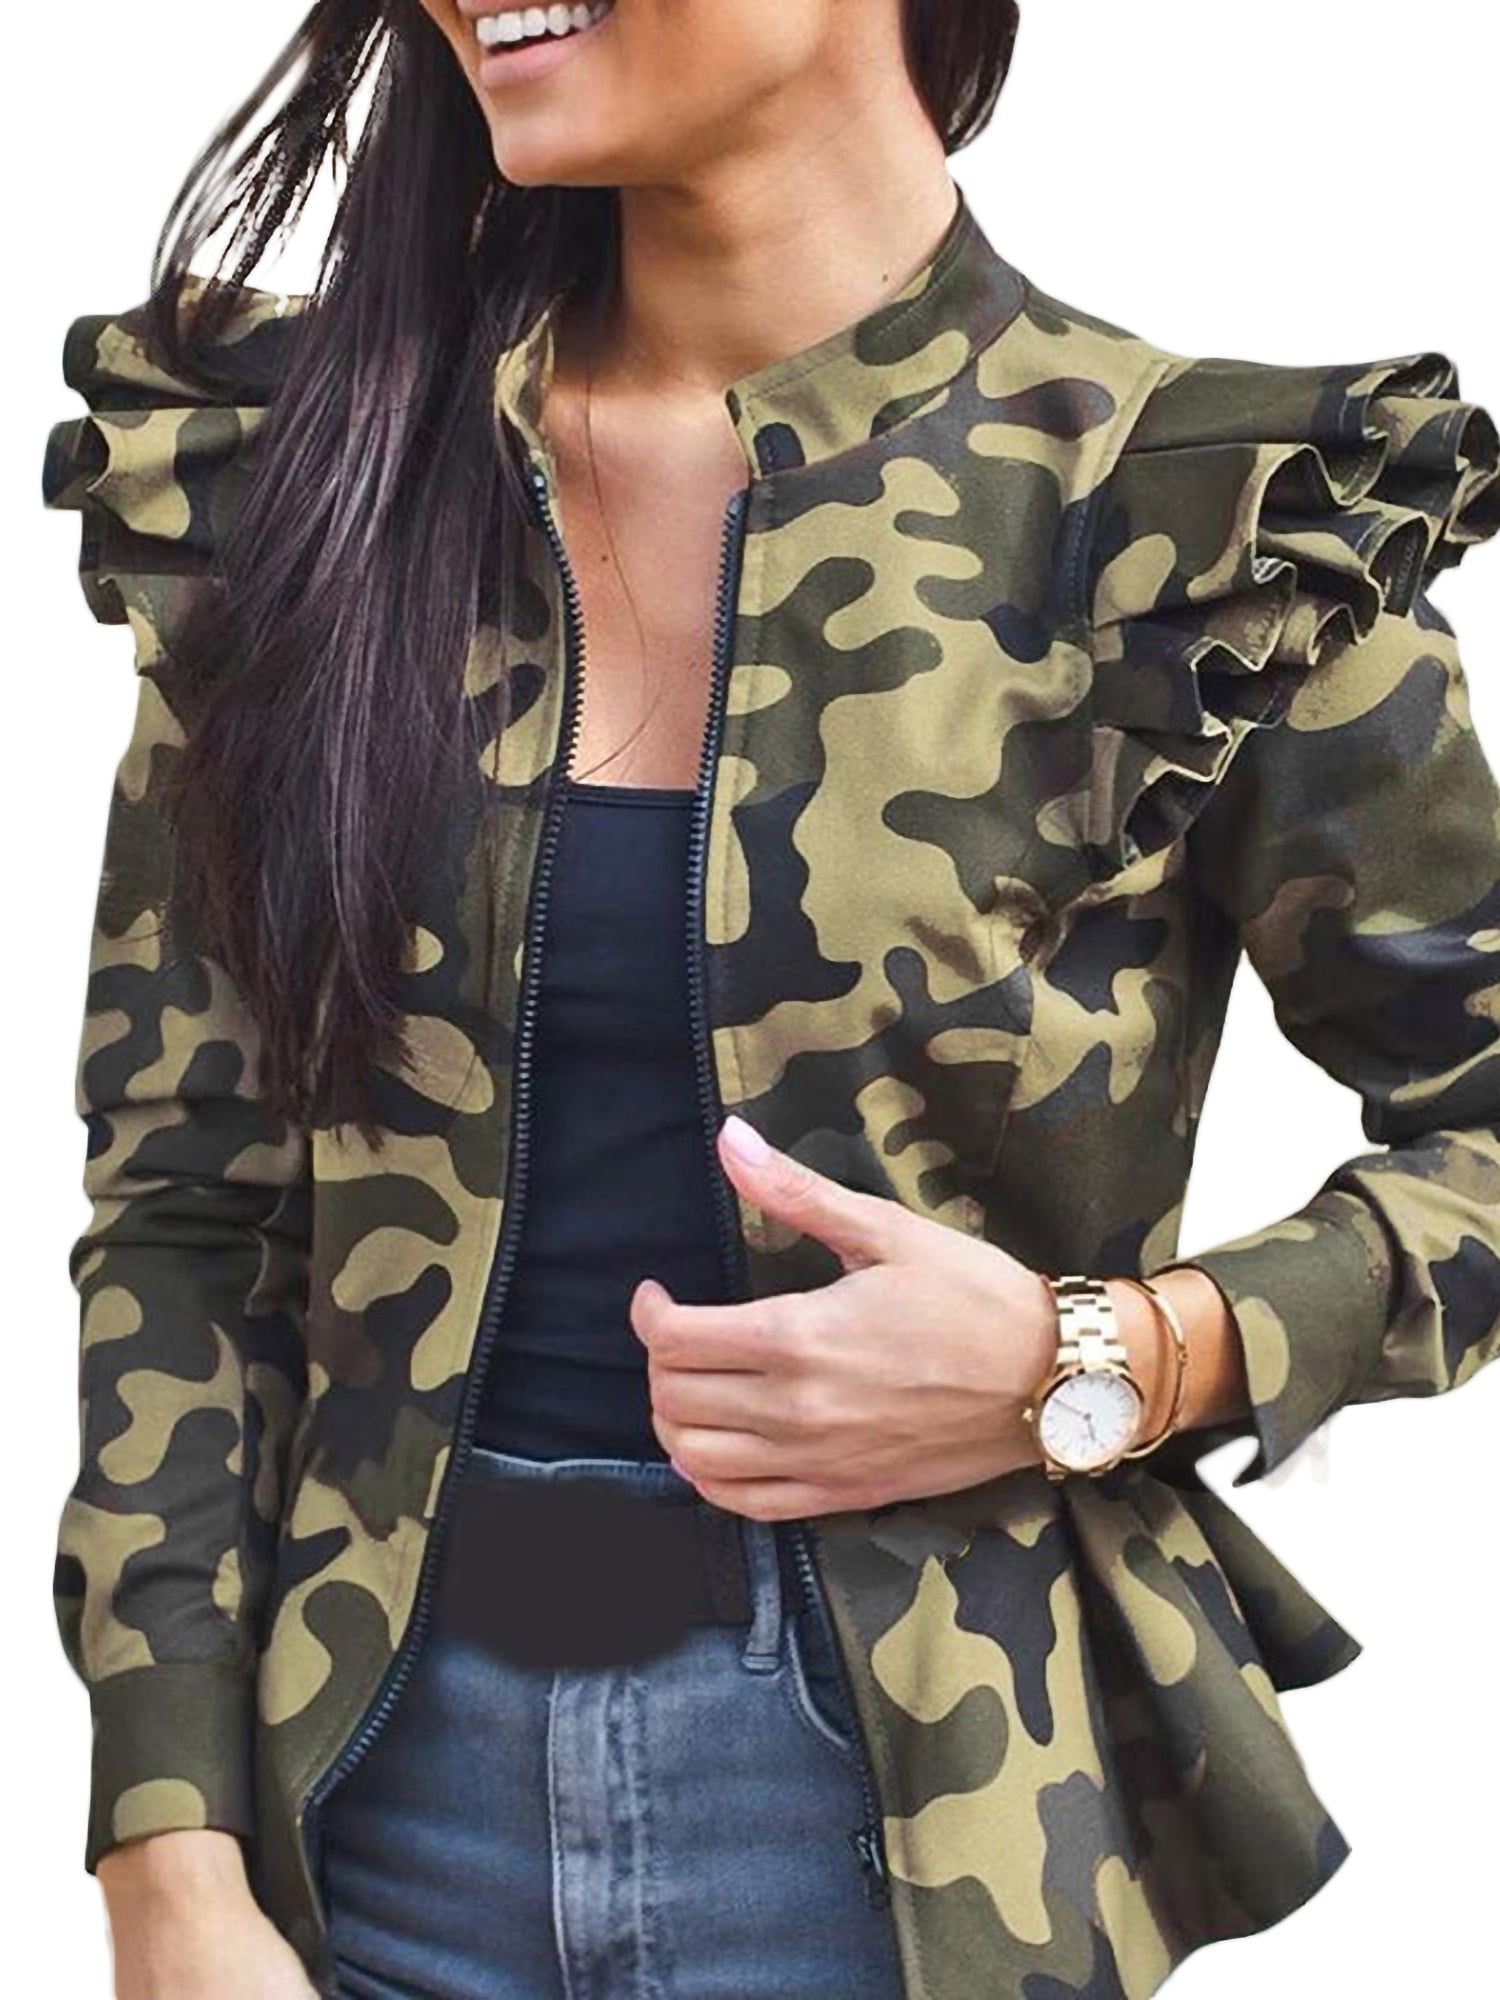 Womens Casual Camouflage Biker Jacket Classic Military Zip Up Bomber Jackets Coat Camouflage XL